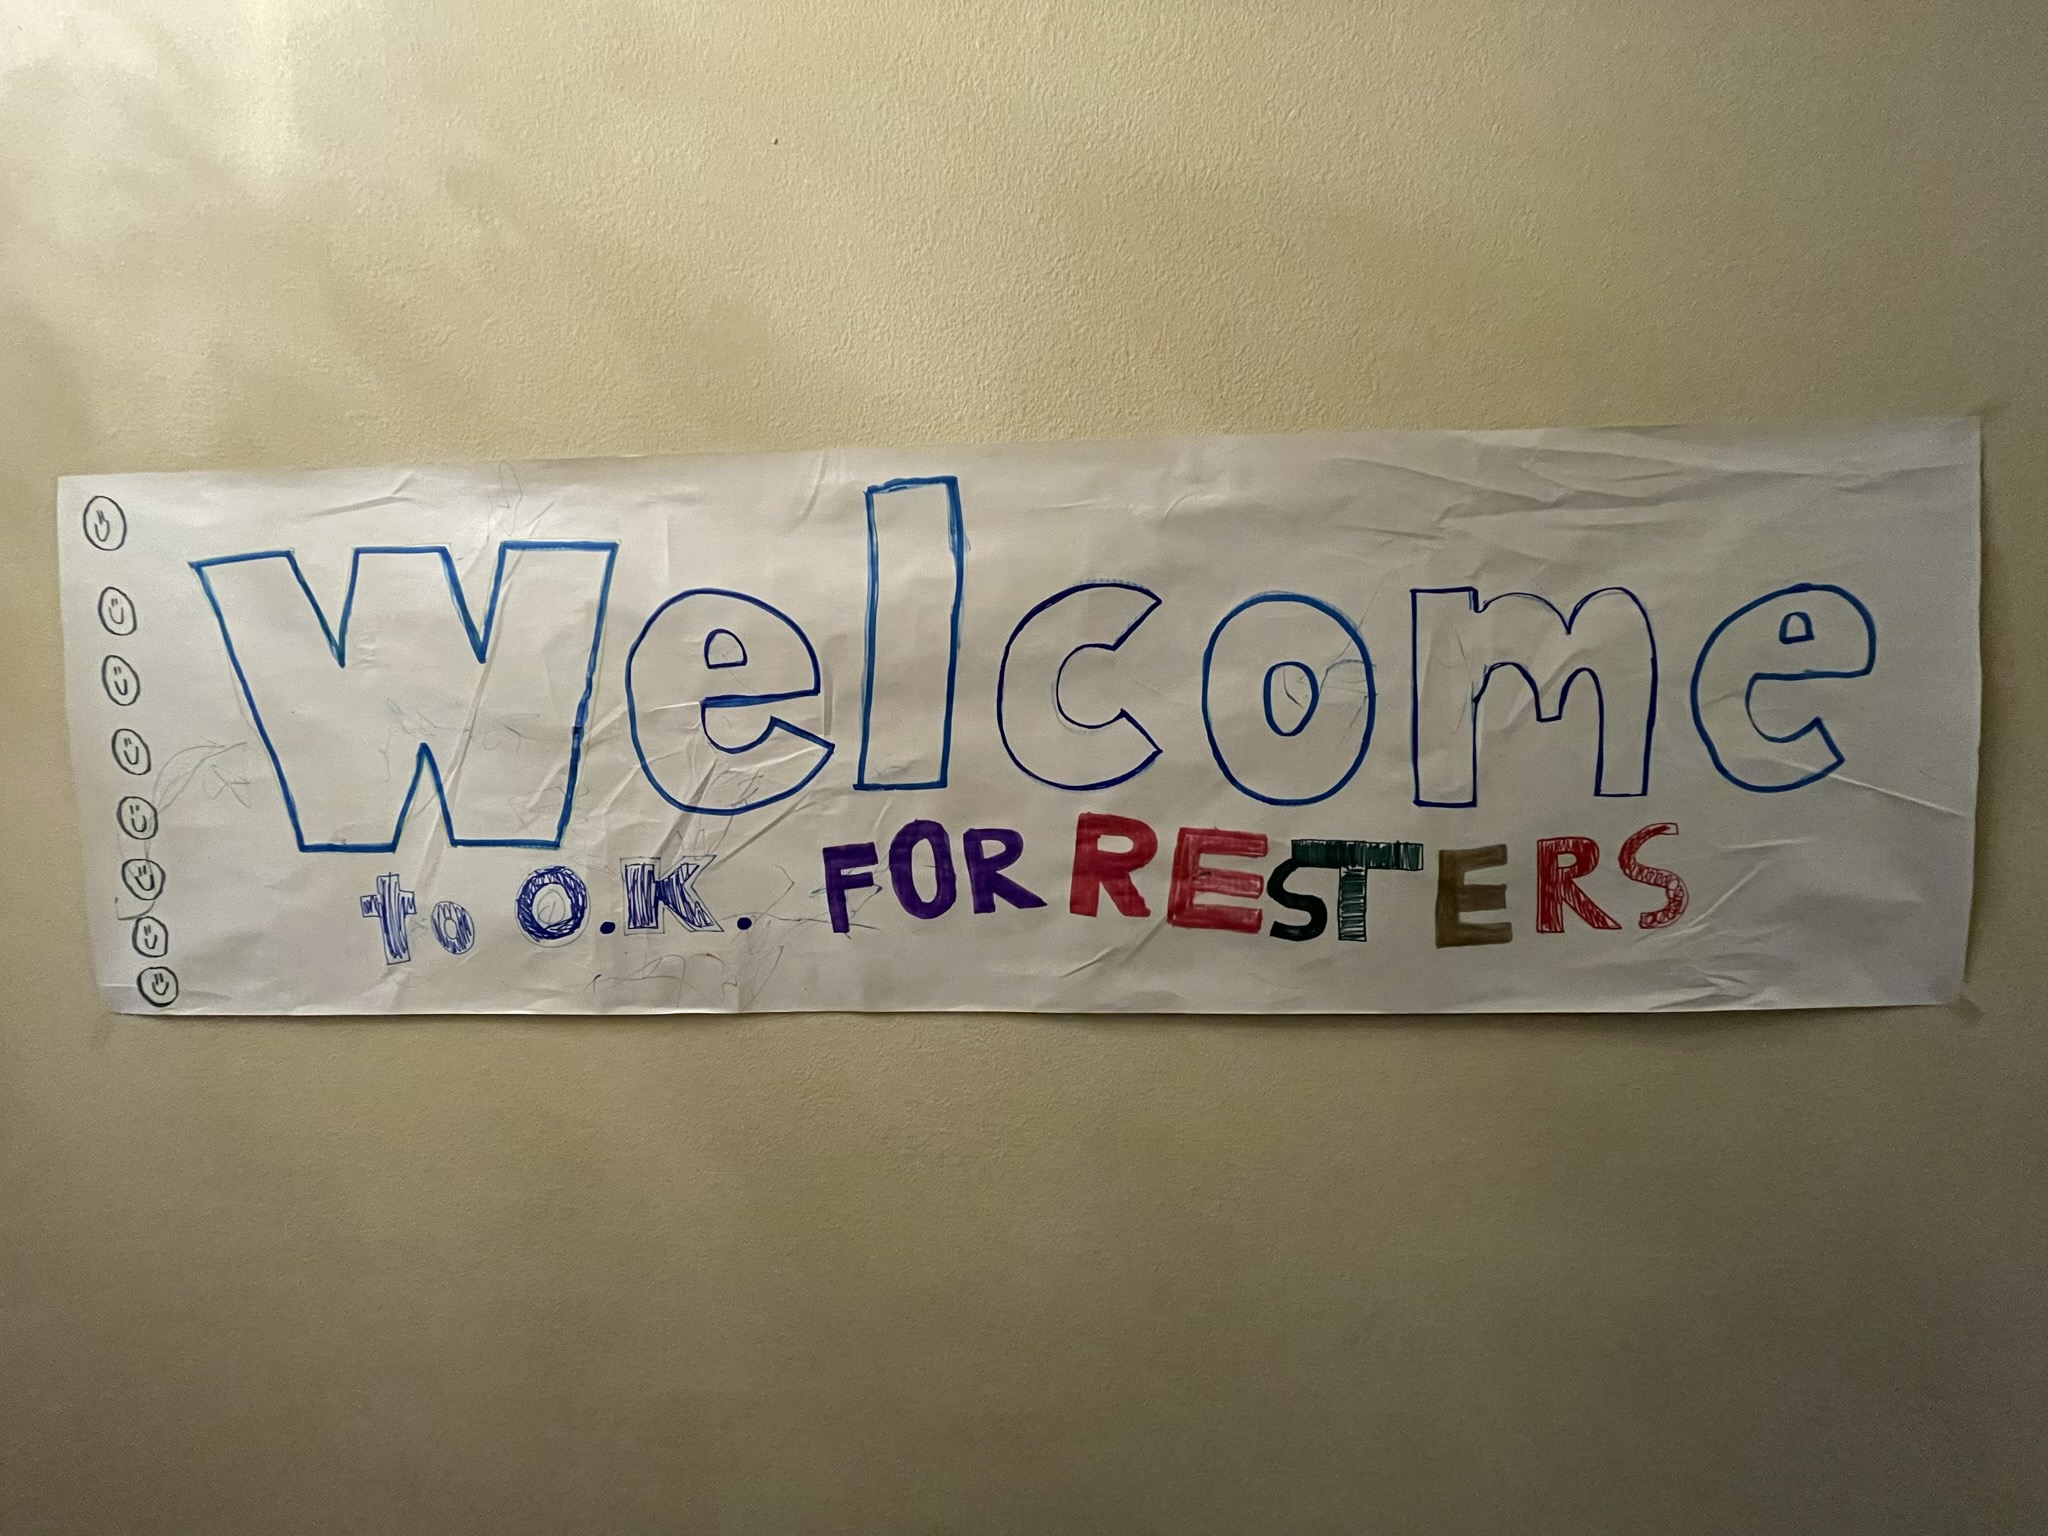 A photo of a homemade sign tacked to a wall that says "Welcome to O.K., Forresters"